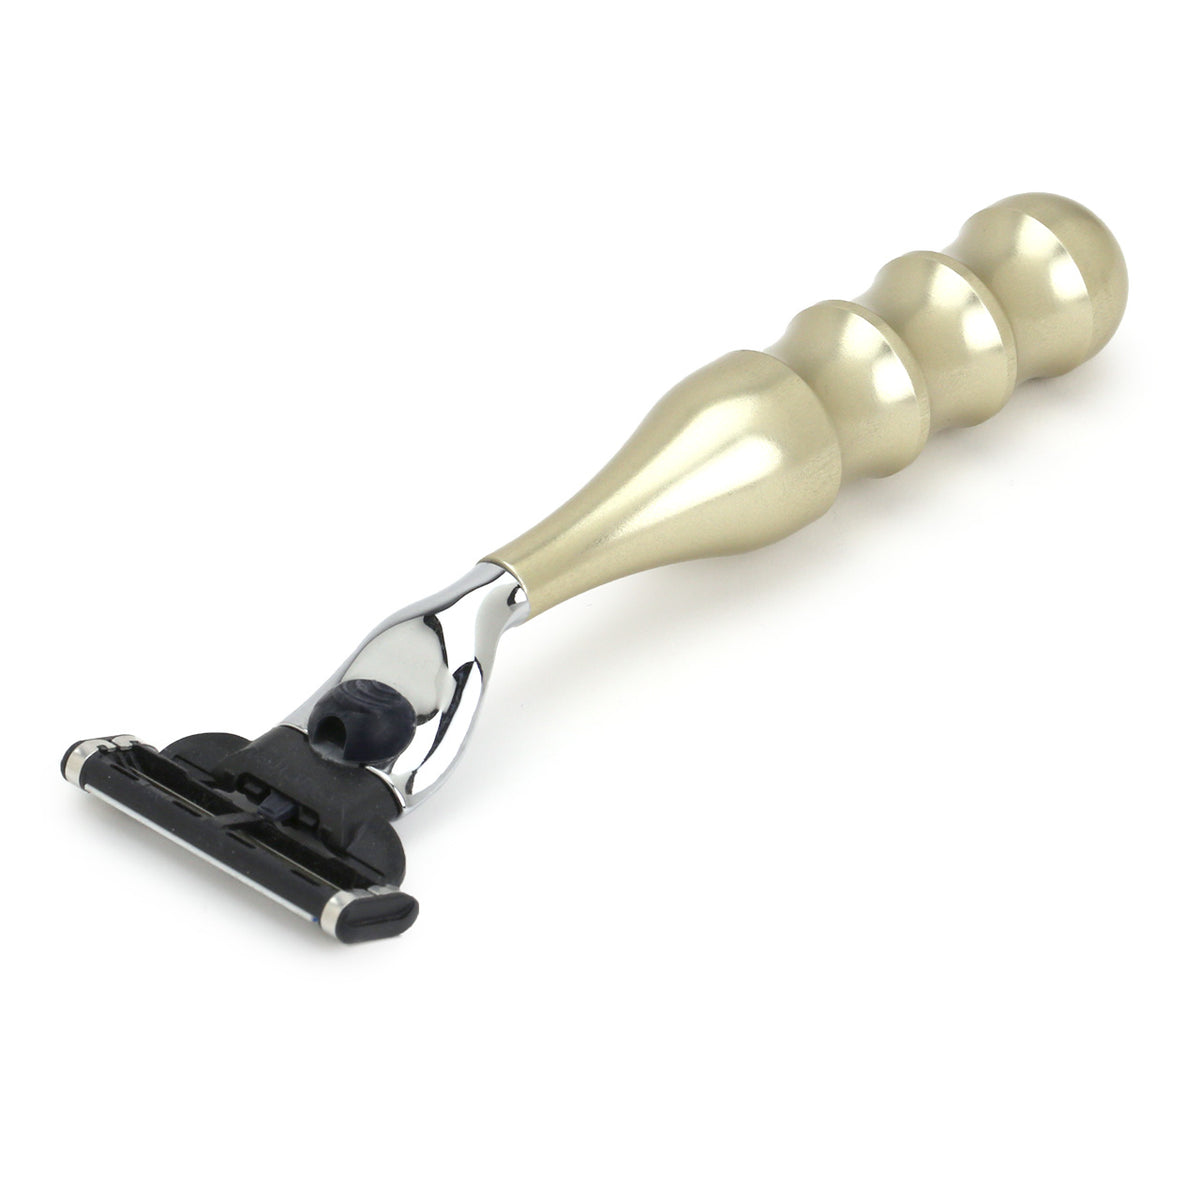 Merker metal handle ladies razor with Mach3 fitting - champagne colour